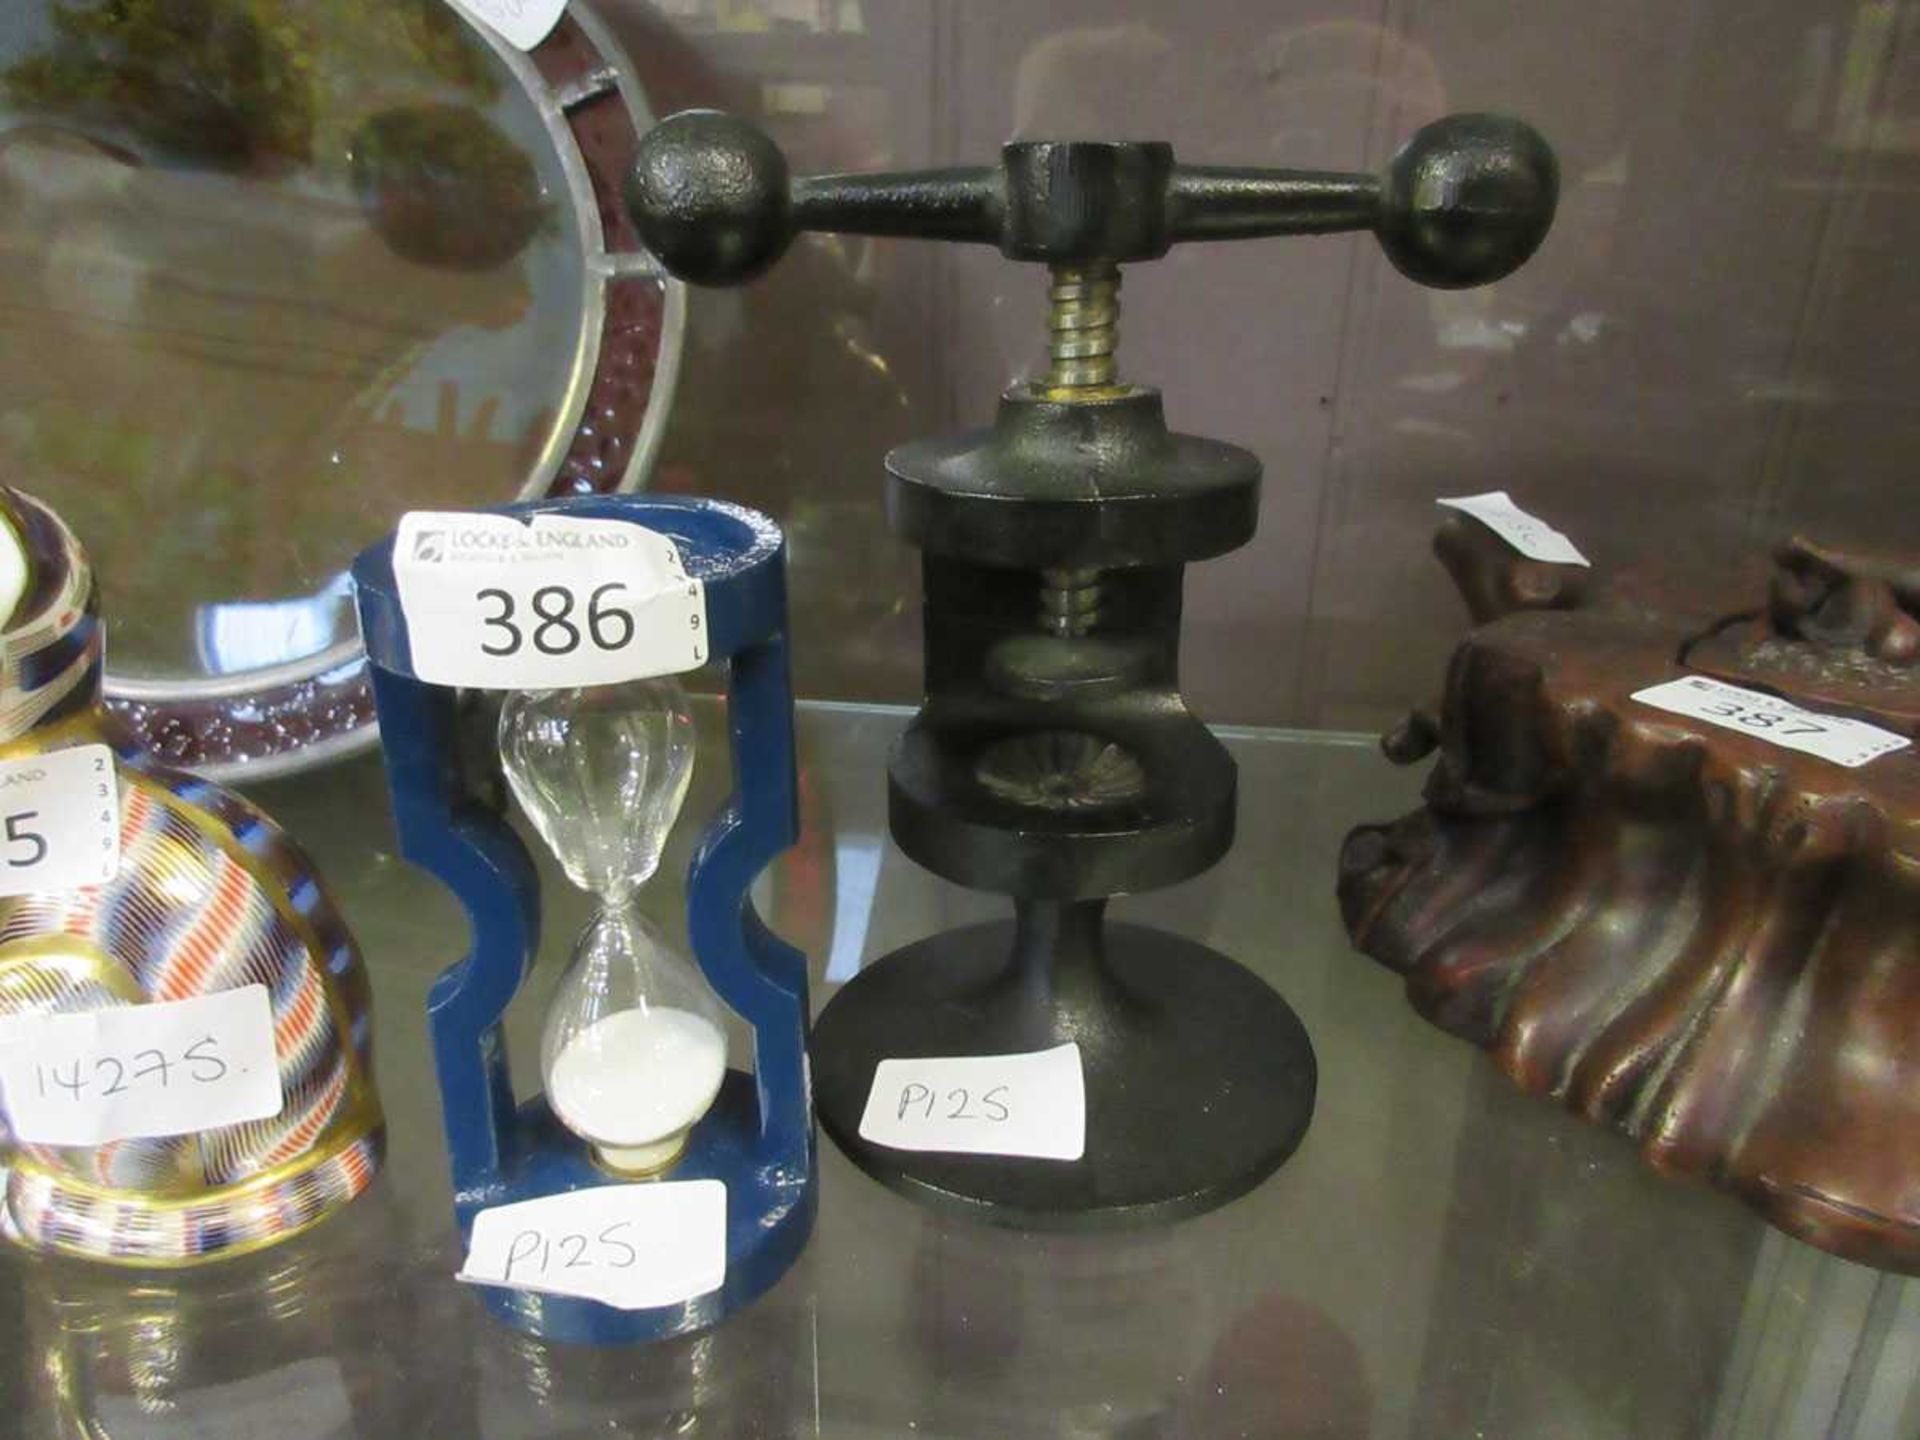 A Robert Welch 'Victor' blue painted egg timer together with a cast metal Robert Welch 'Hobart'